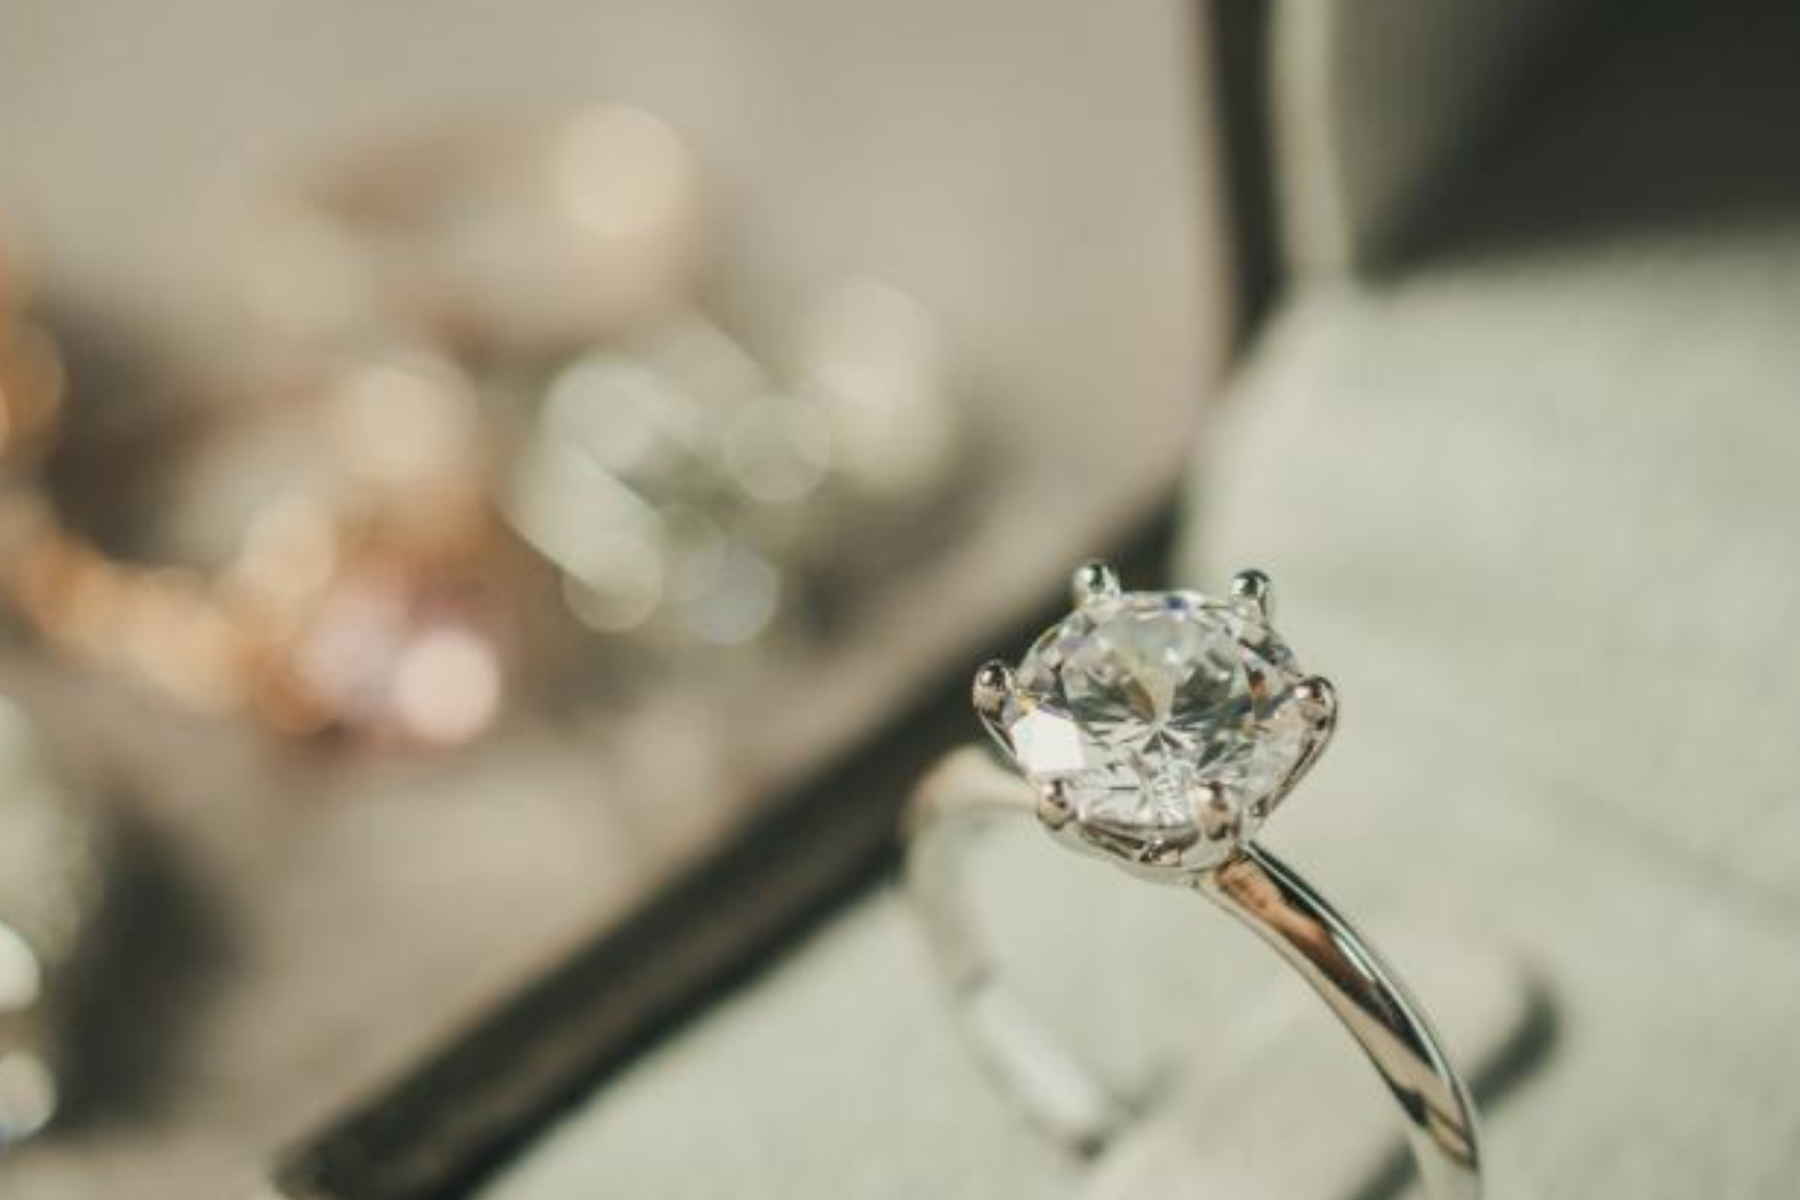 An image of a diamond engagement ring with a blurry background